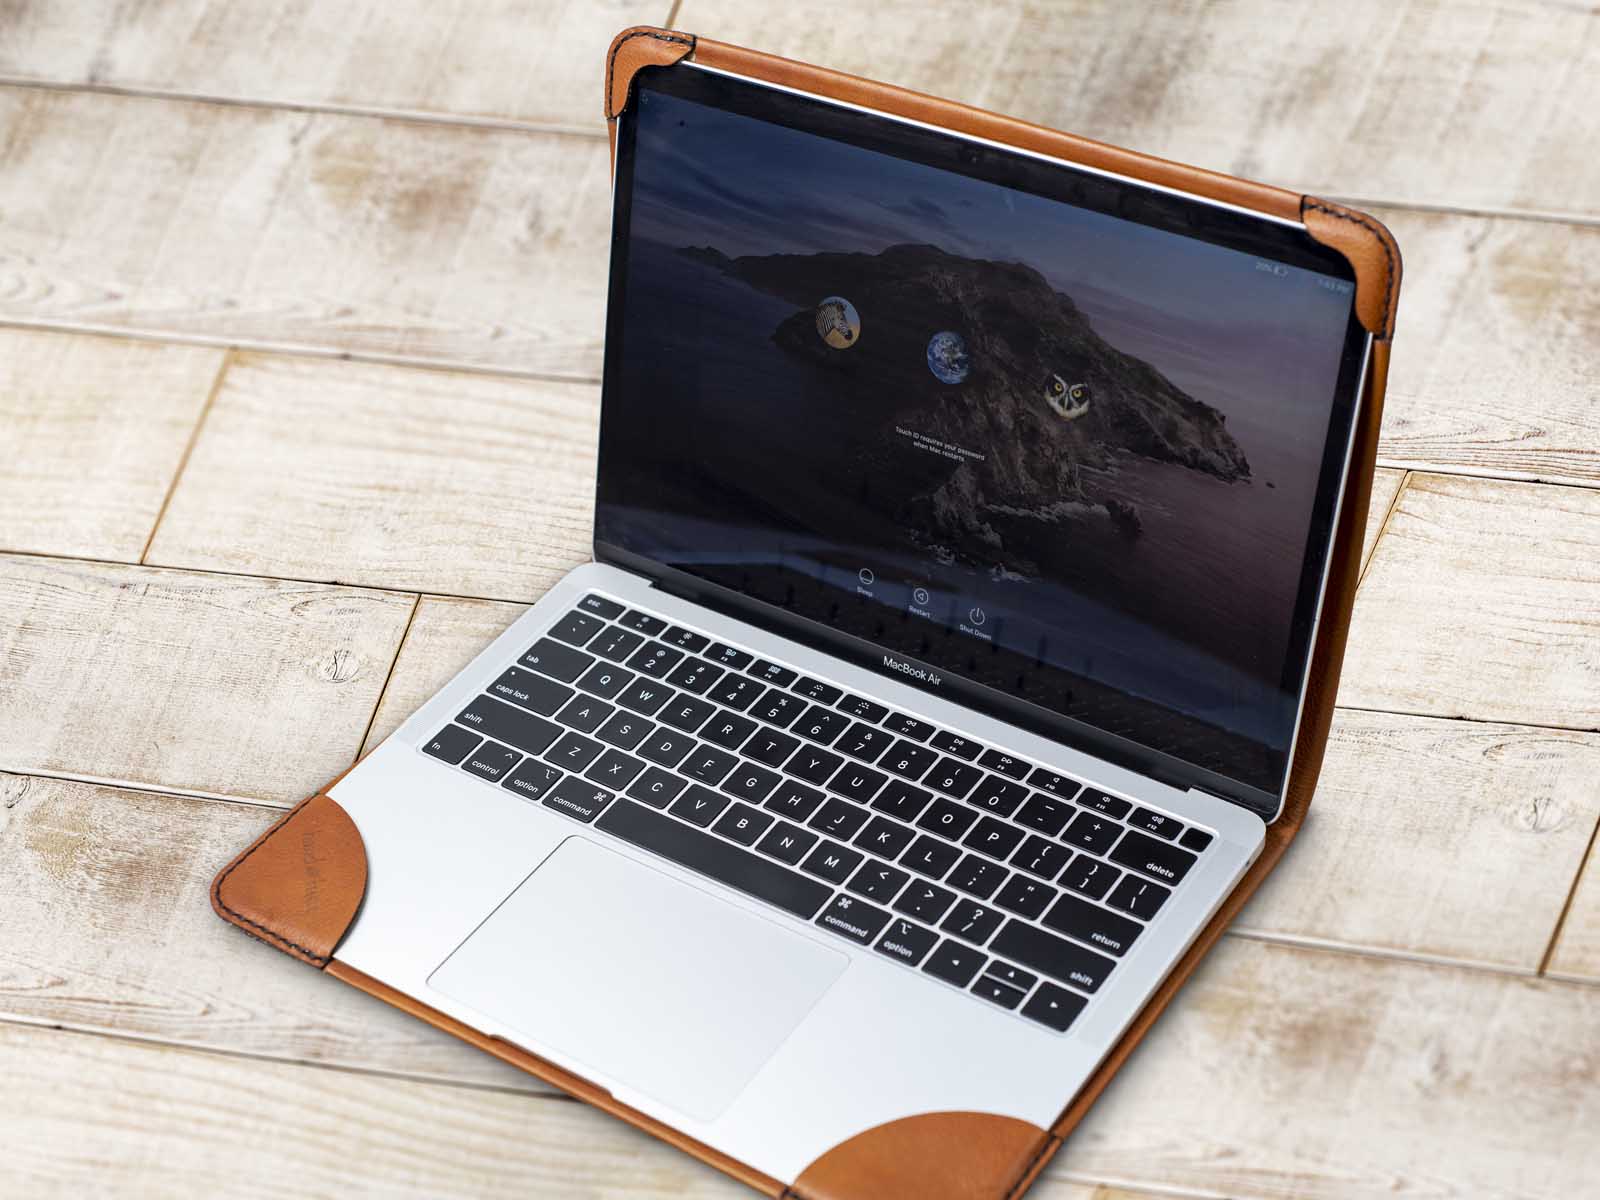 Leather Windows Laptop Cover